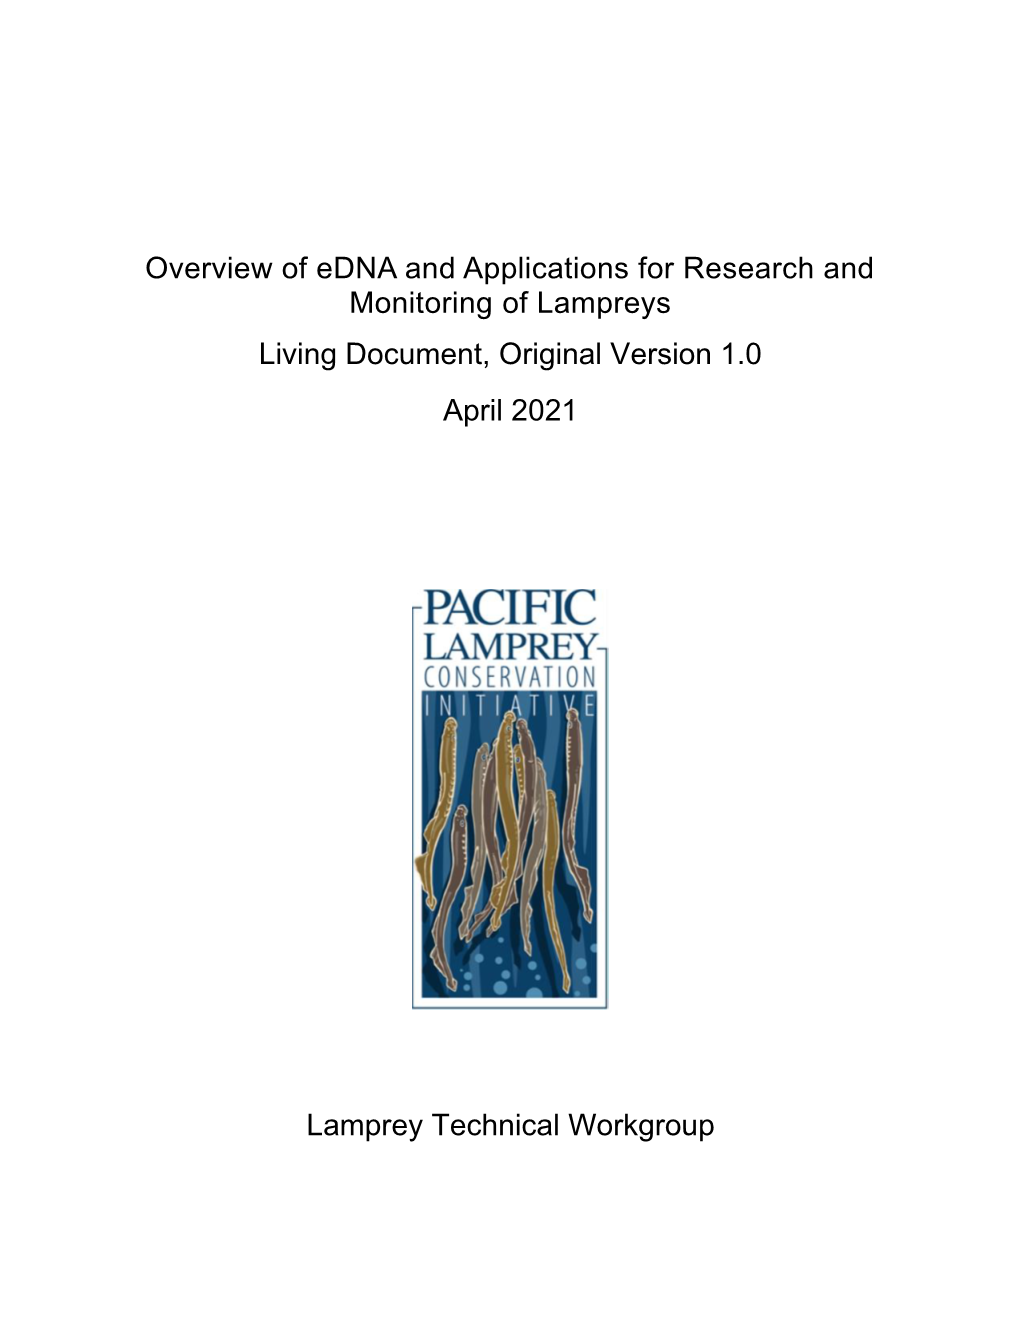 Overview of Edna and Applications for Research and Monitoring of Lampreys Living Document, Original Version 1.0 April 2021 Lampr